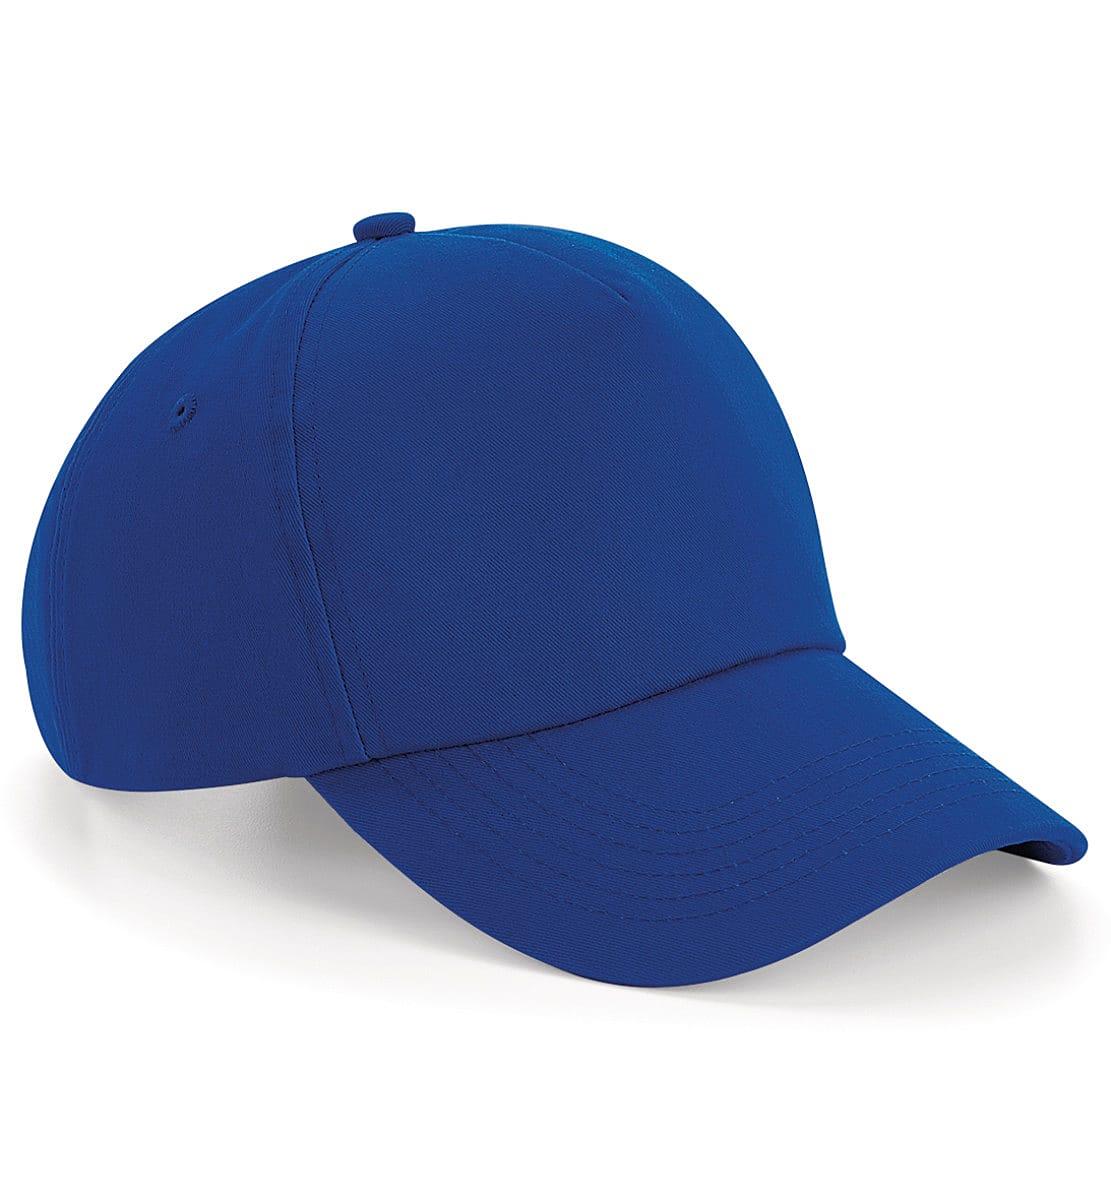 Beechfield Authentic 5 Panel Cap in Bright Royal (Product Code: B25)